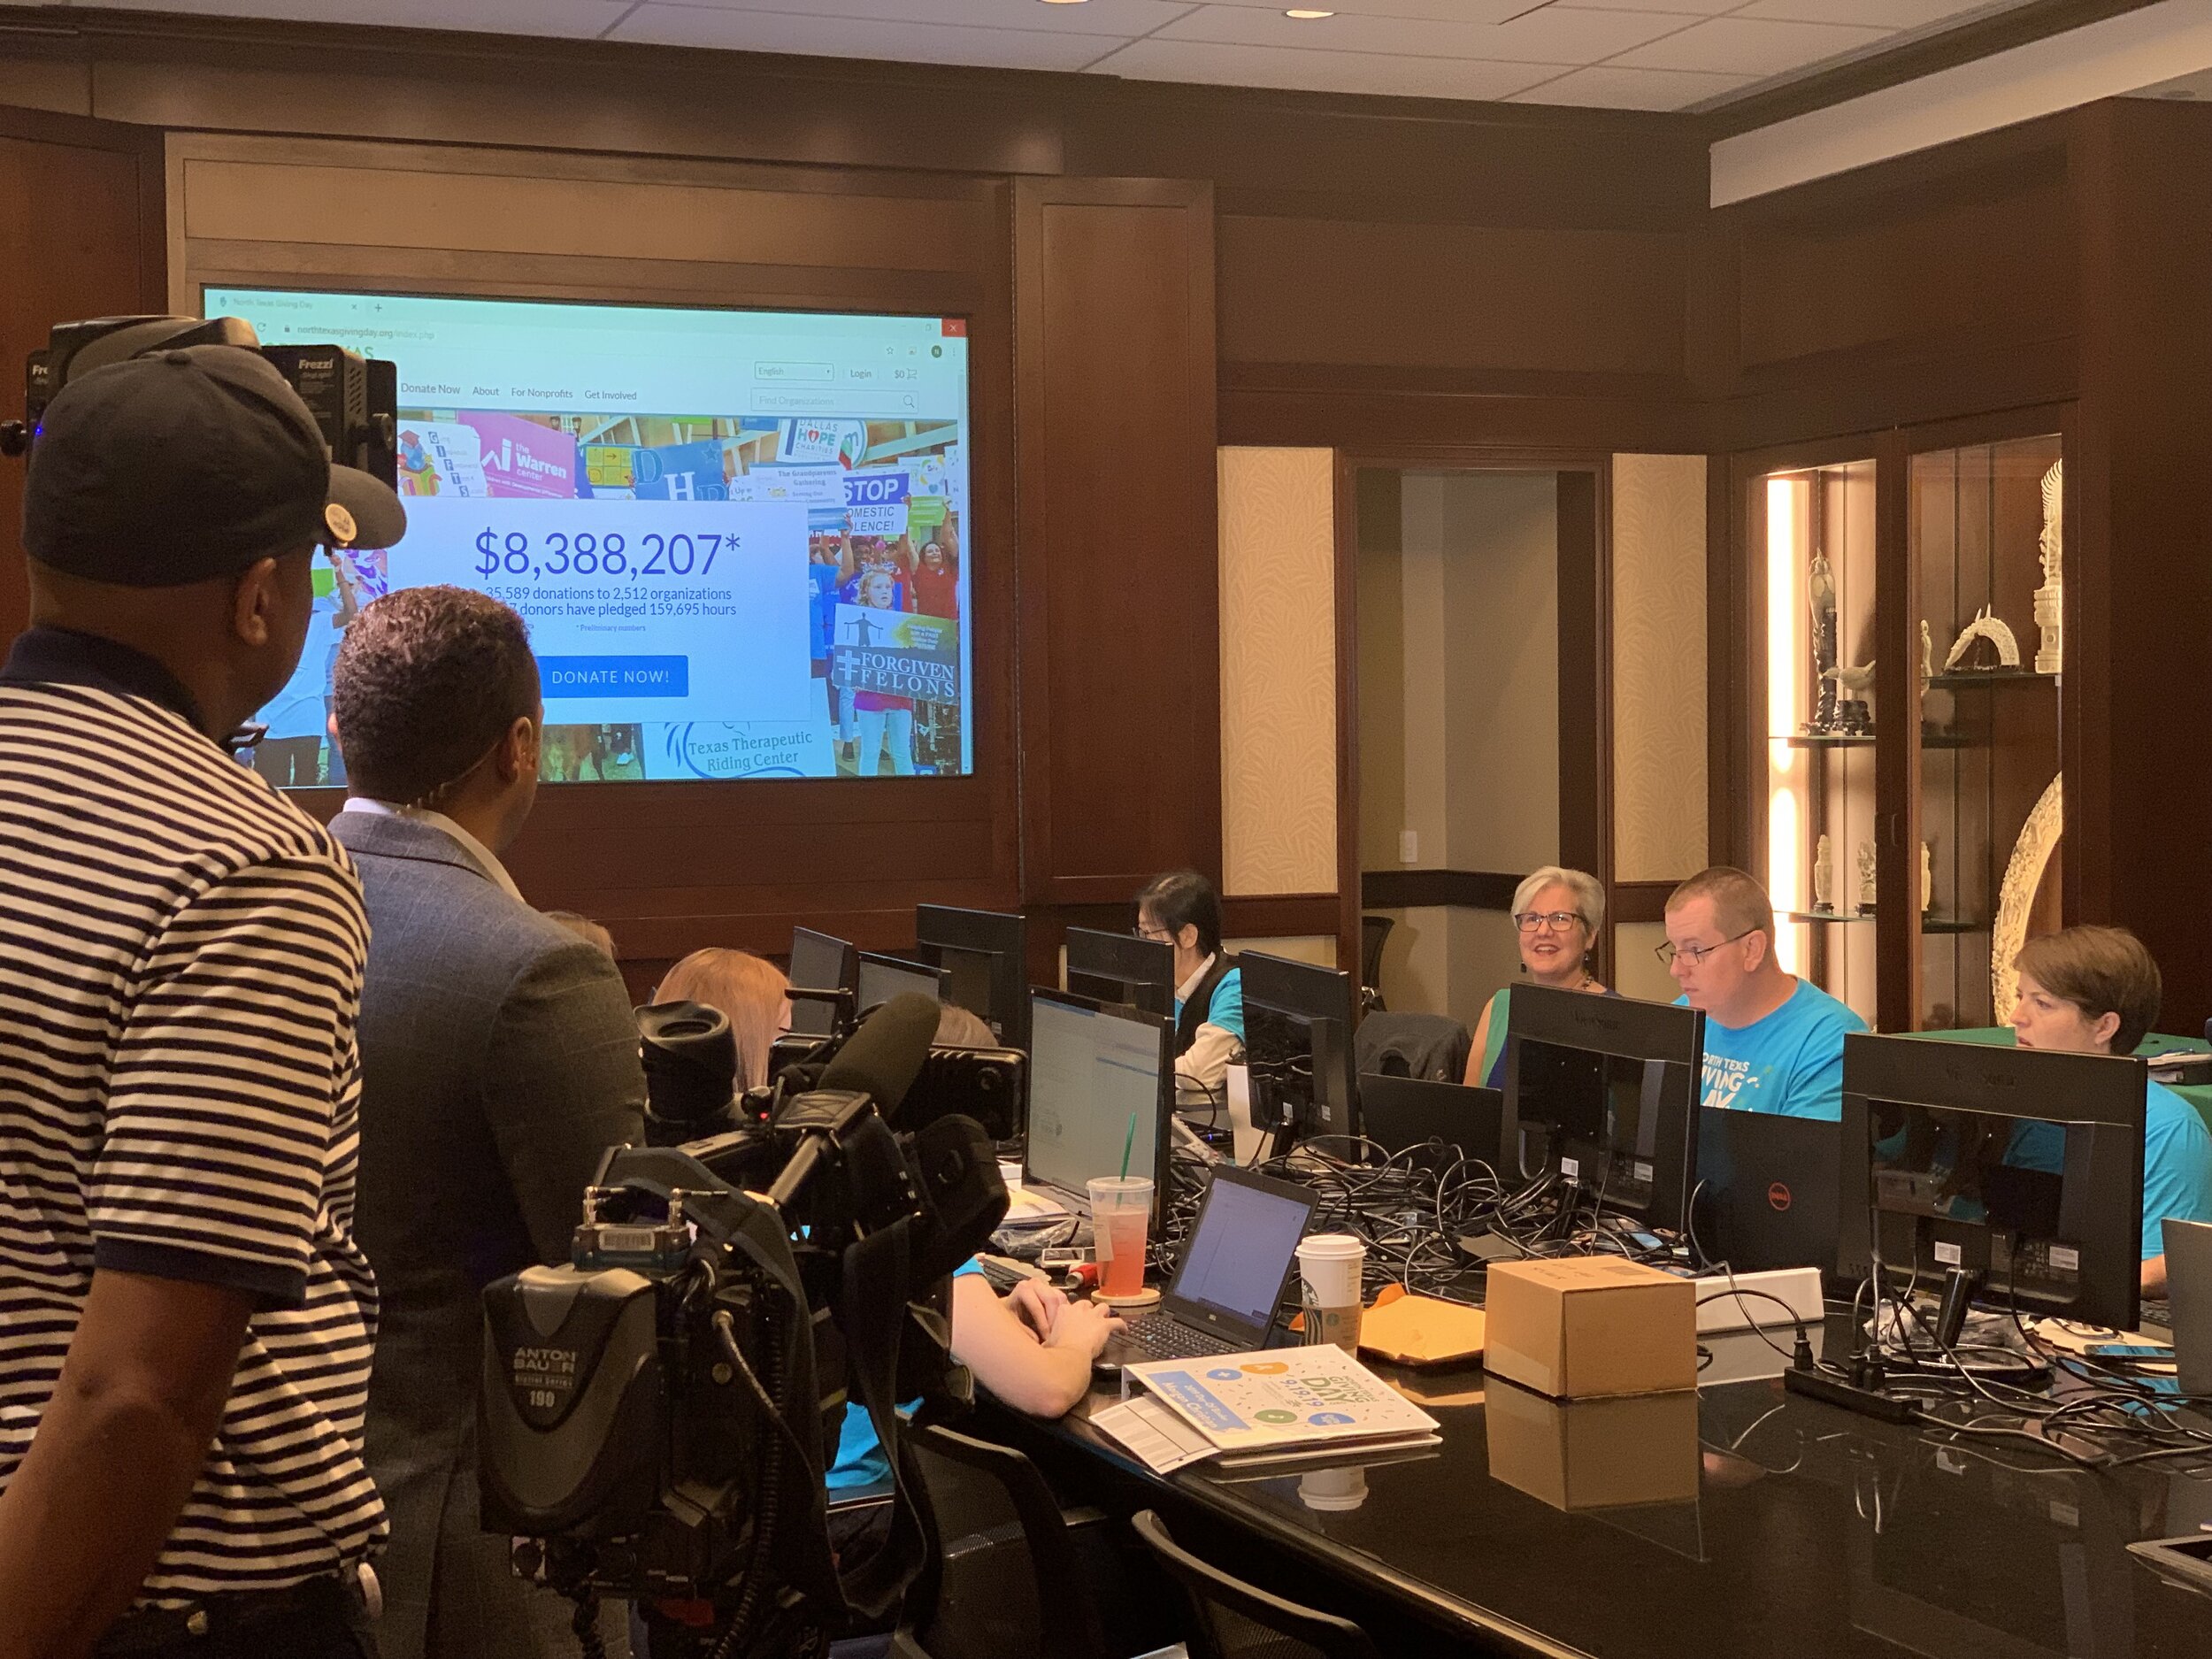 Behind the scenes in the 2019 NTxGD war room. SparkFarm invited TV cameras to capture the action as dawn broke and the day kicked off, monitoring website performance and sharing stats on a big screen. (Photo credit Carrie Dyer/SparkFarm.)